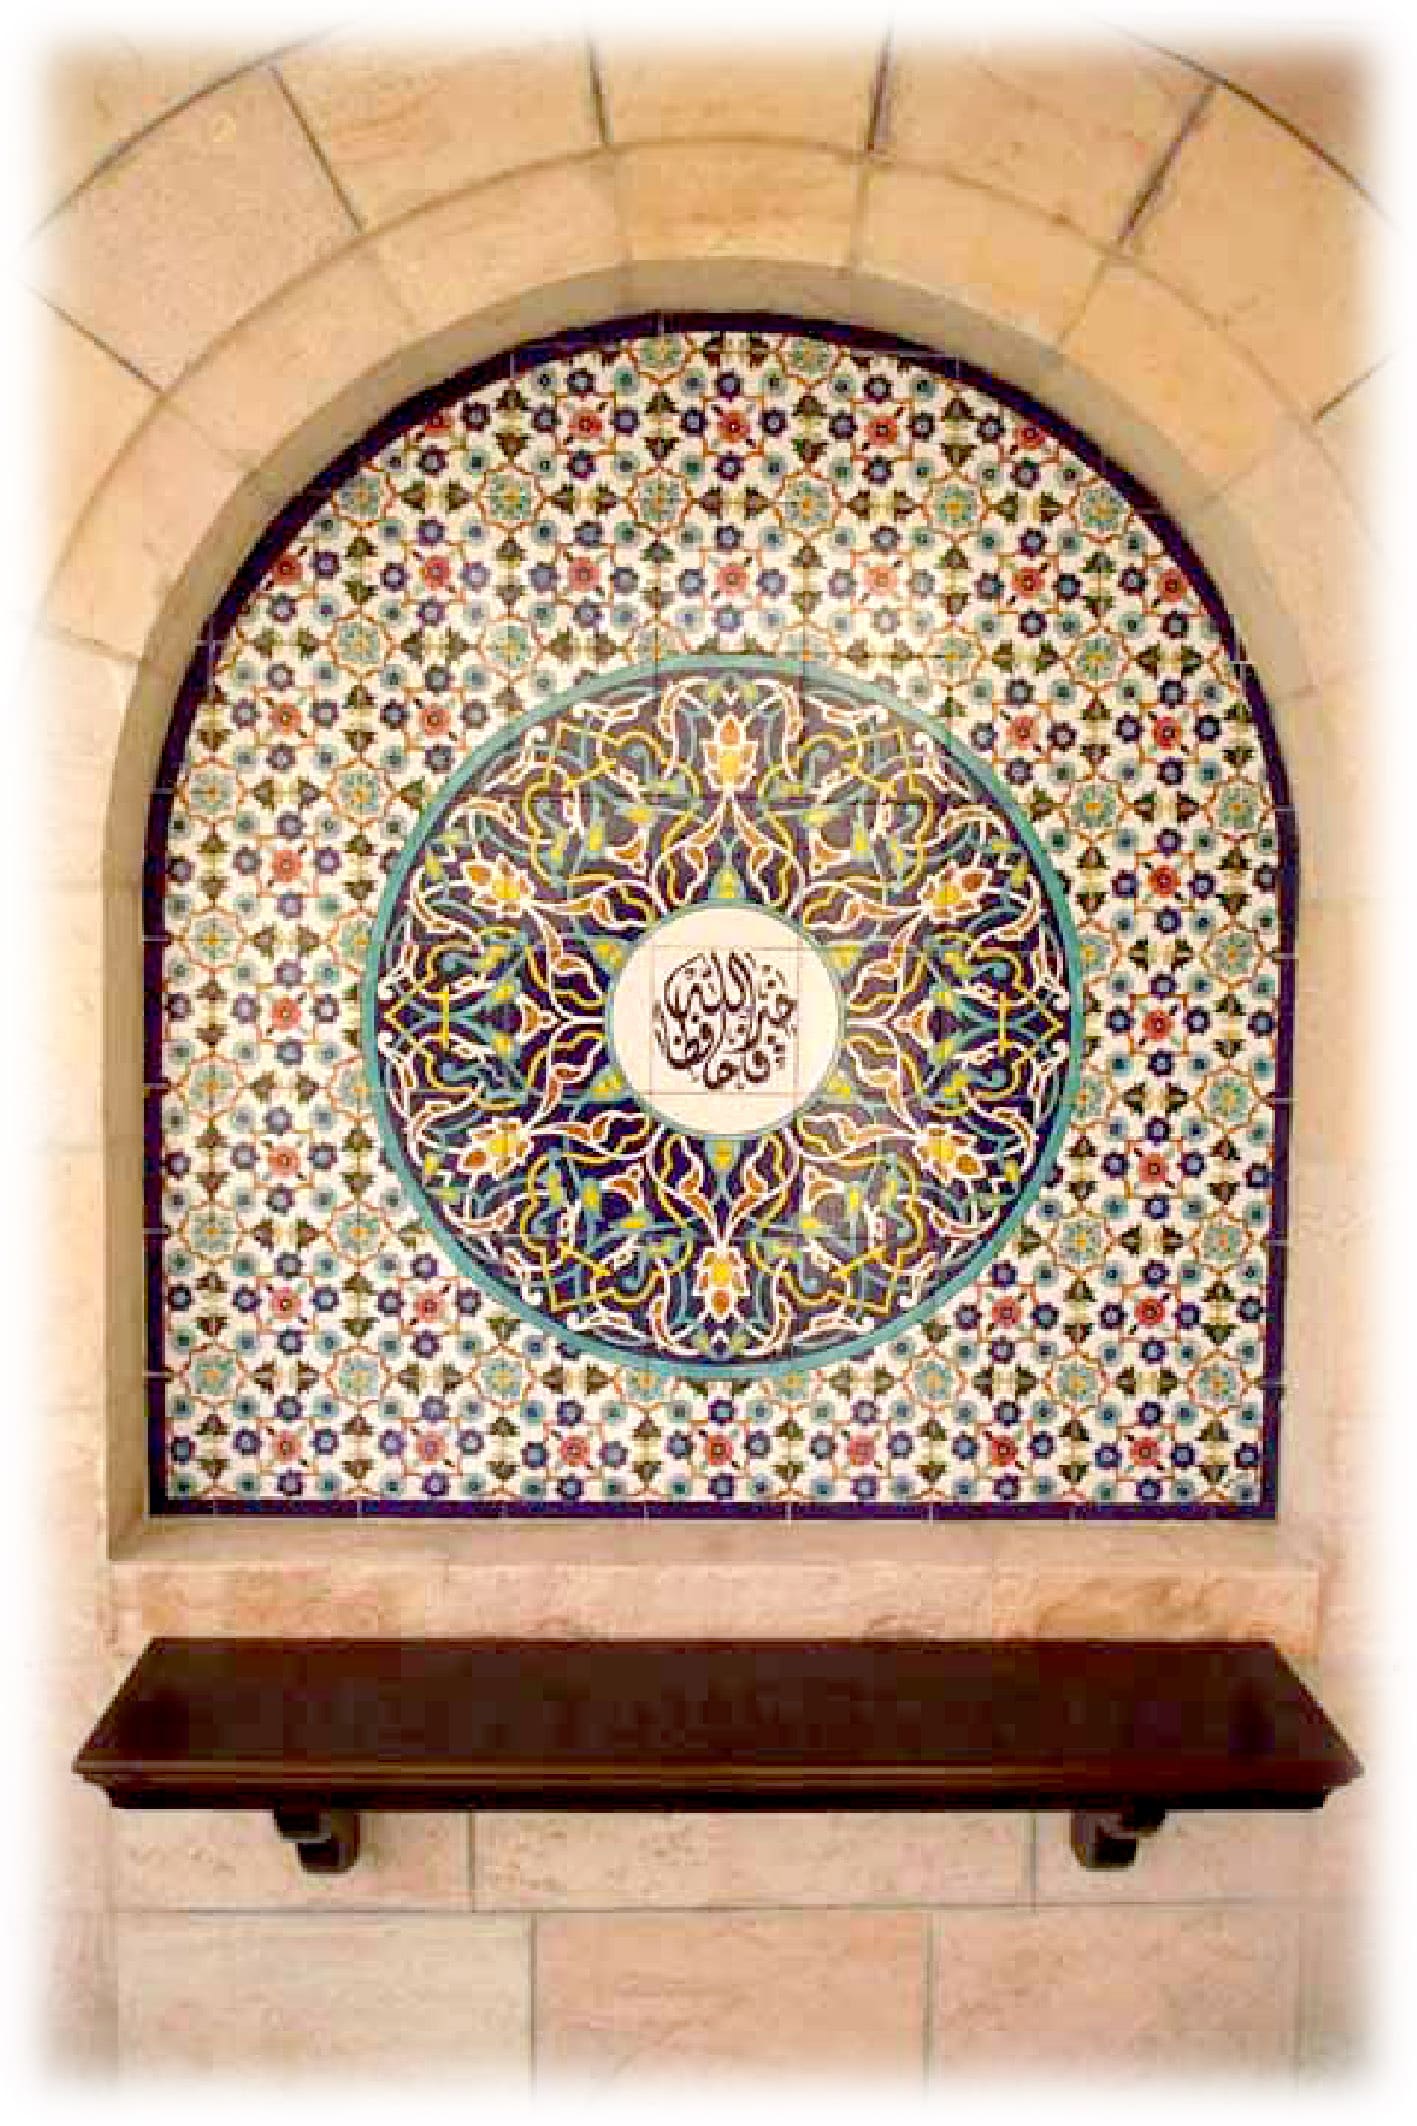 Custom bespoke tile design project in the Middle East